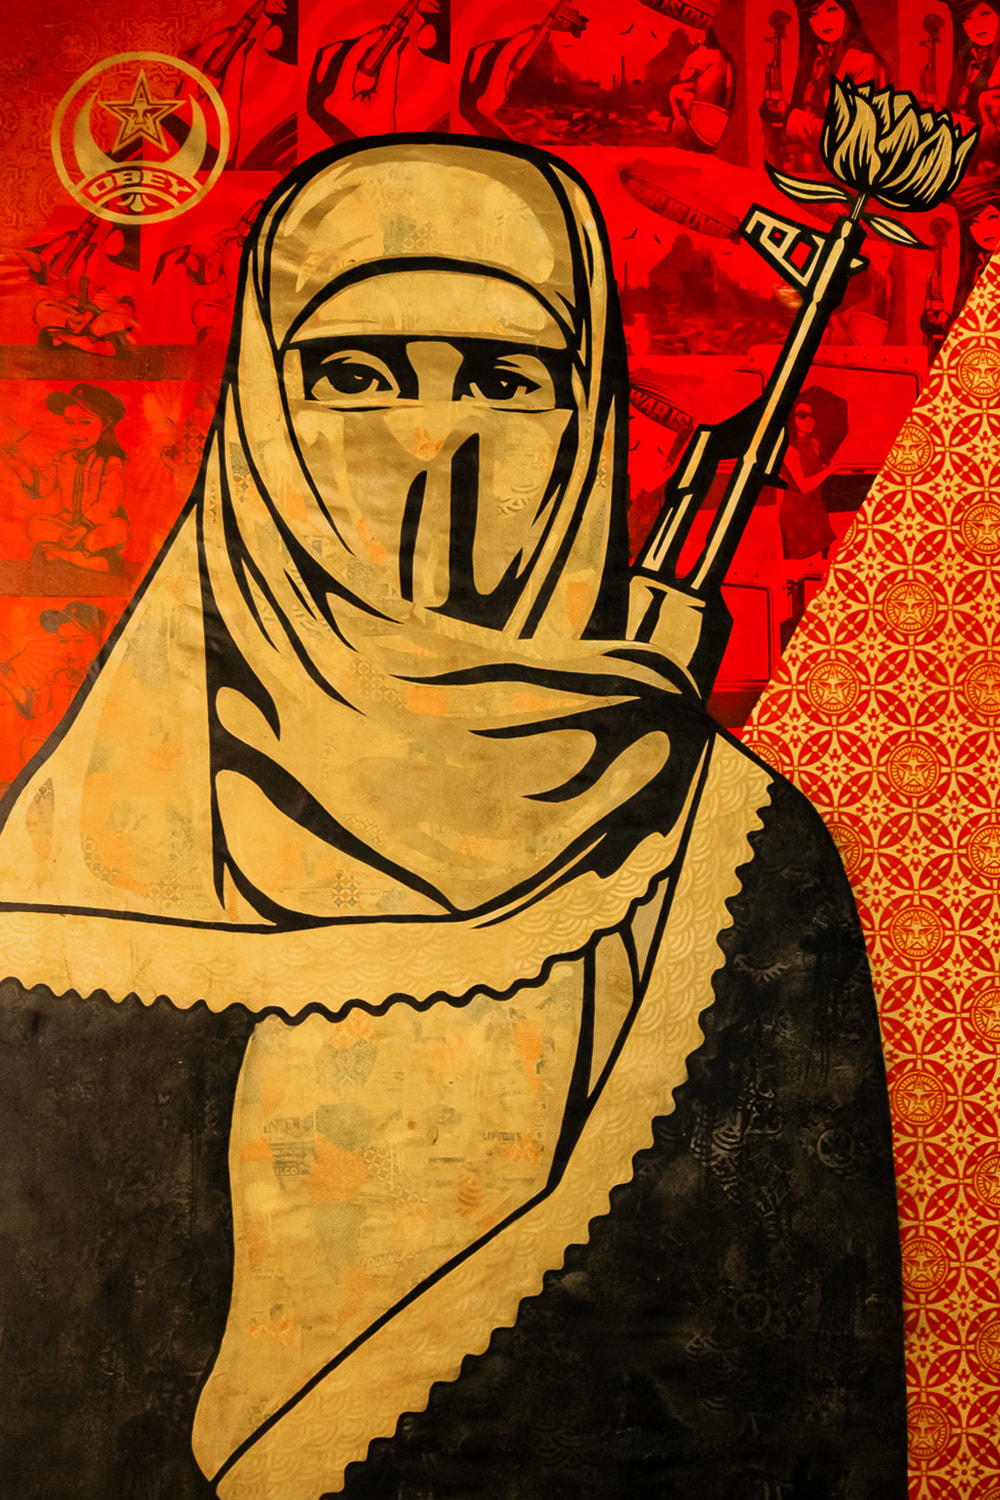 Singapore: Art From The Streets Exhibition at the ArtScience Museum - Detail of Middle East Mural - Shepard Fairey (Obey) - 2009.